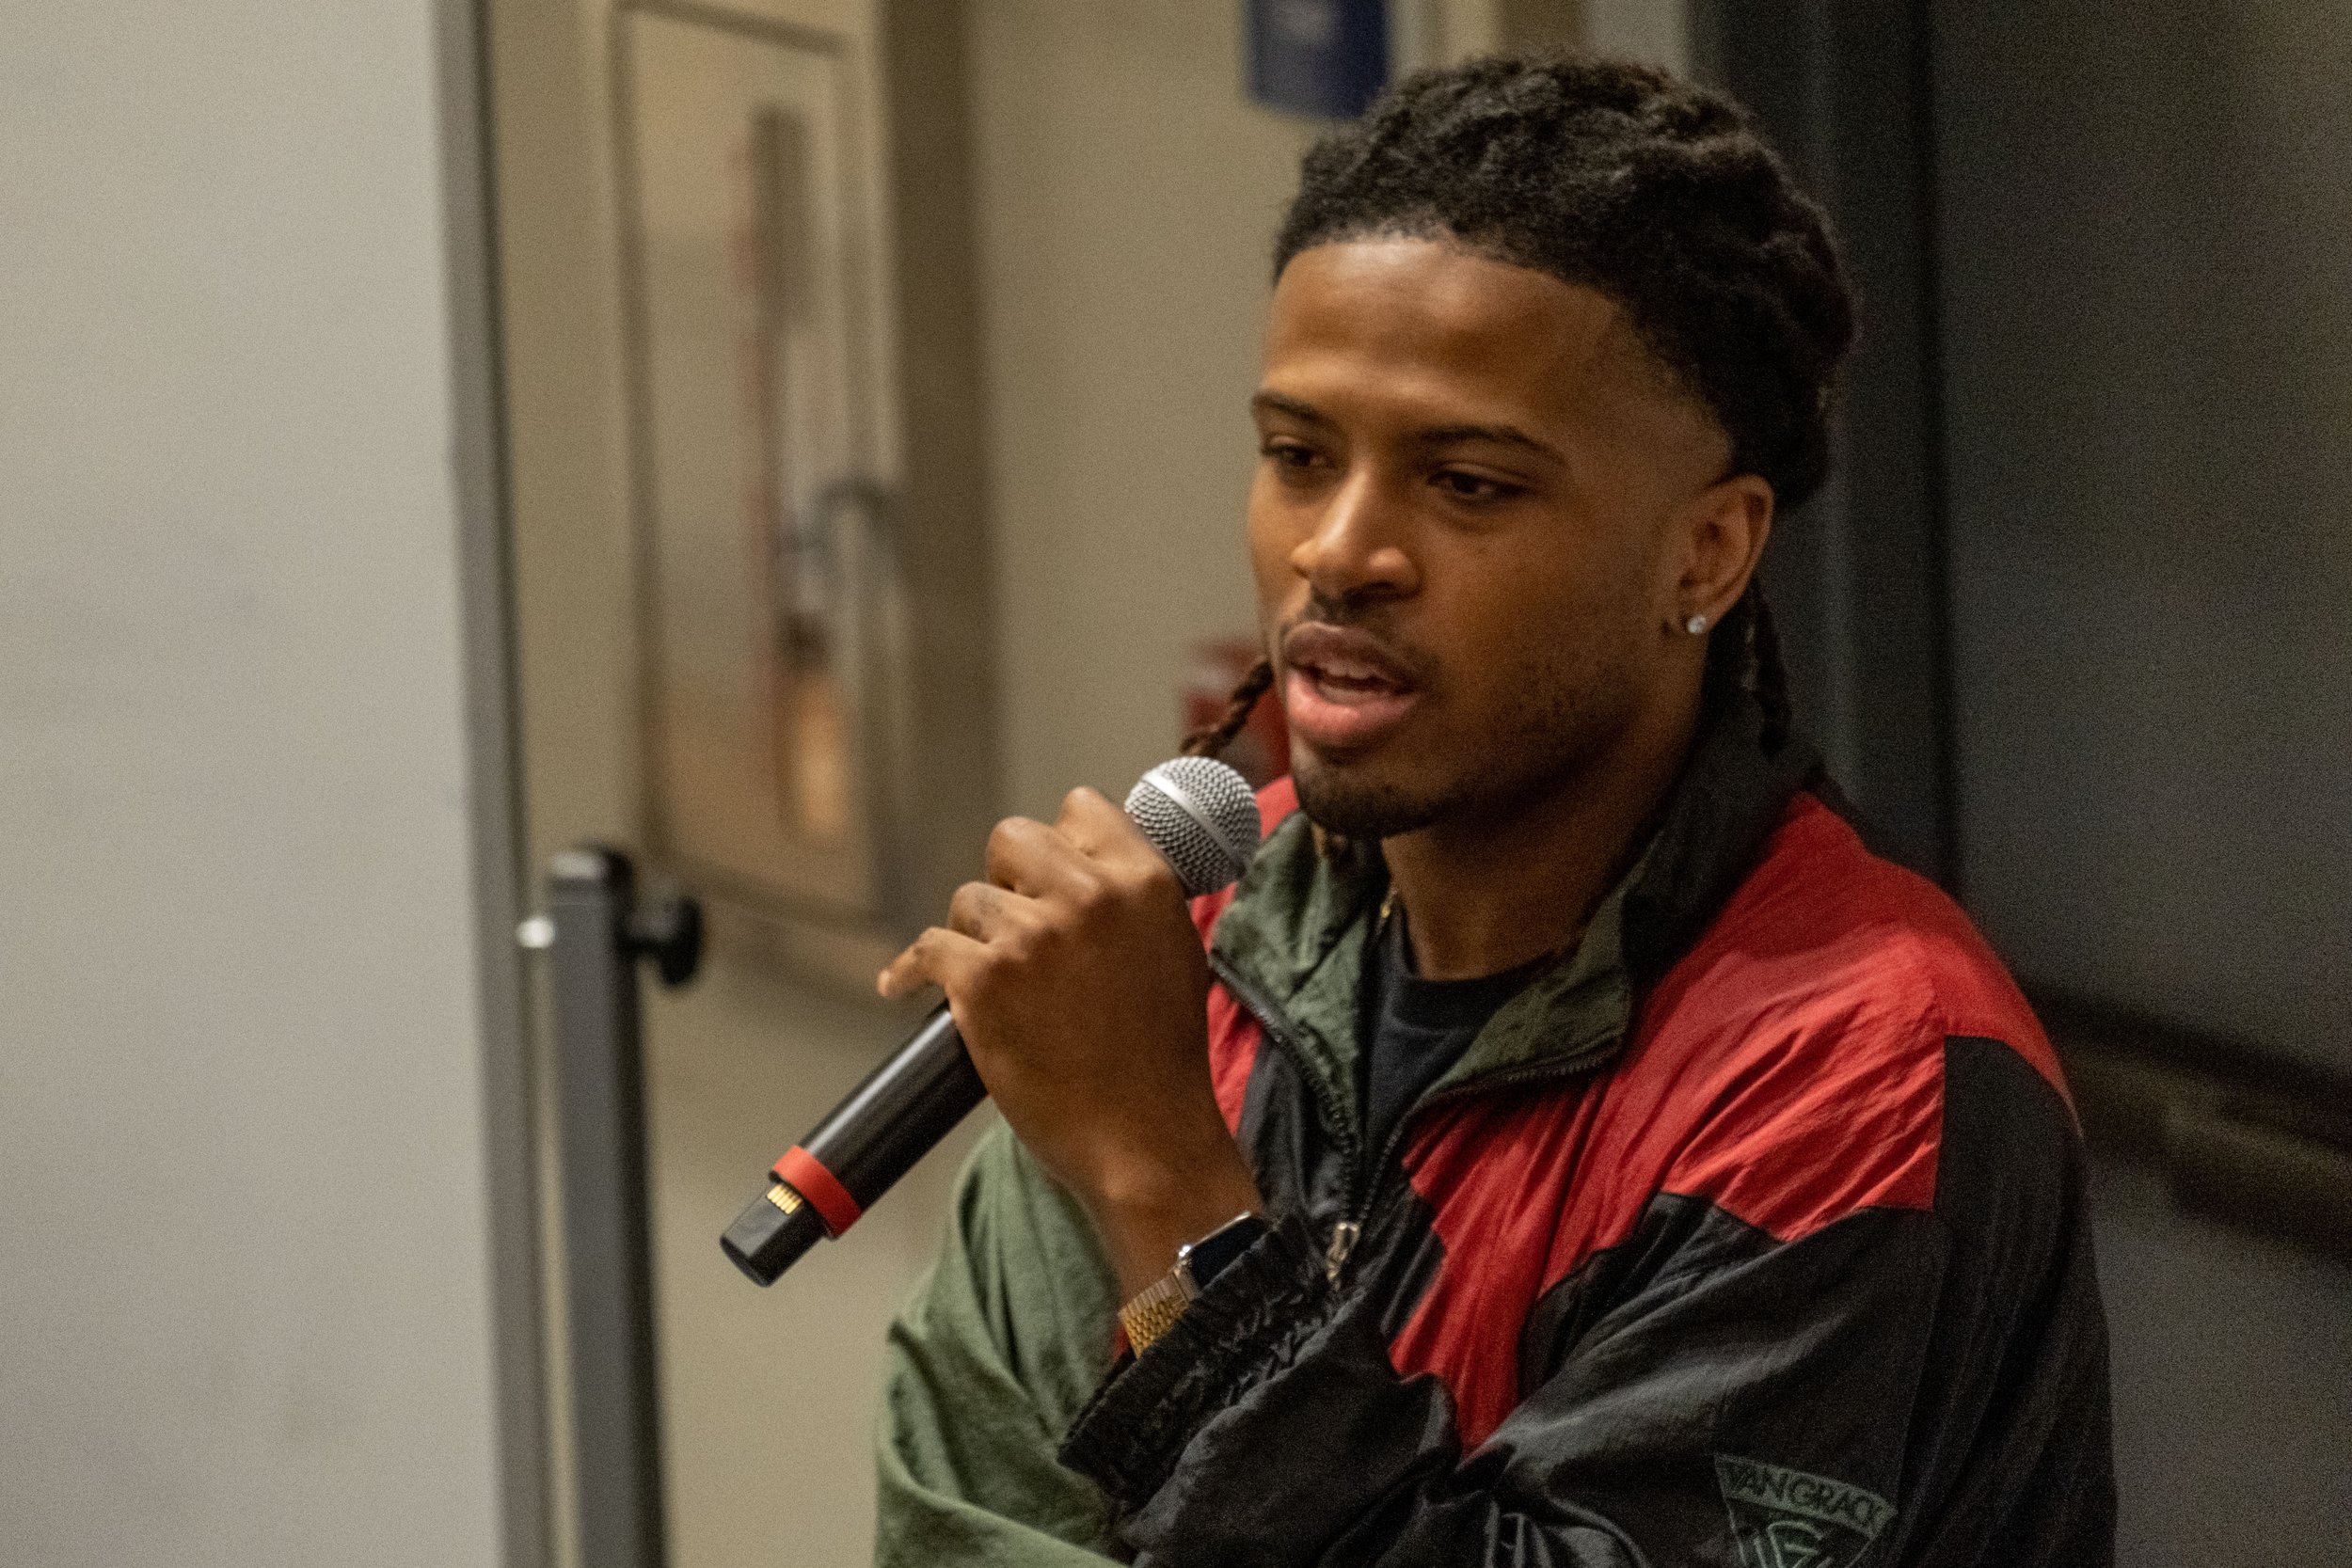  Cameron Terry, president of the Black Collegians Club, speaks on his experience about how the play was brought to his attention  at the community gathering in lieu of a protest against the play "By The River Rivanna" in the Student Services Orientat